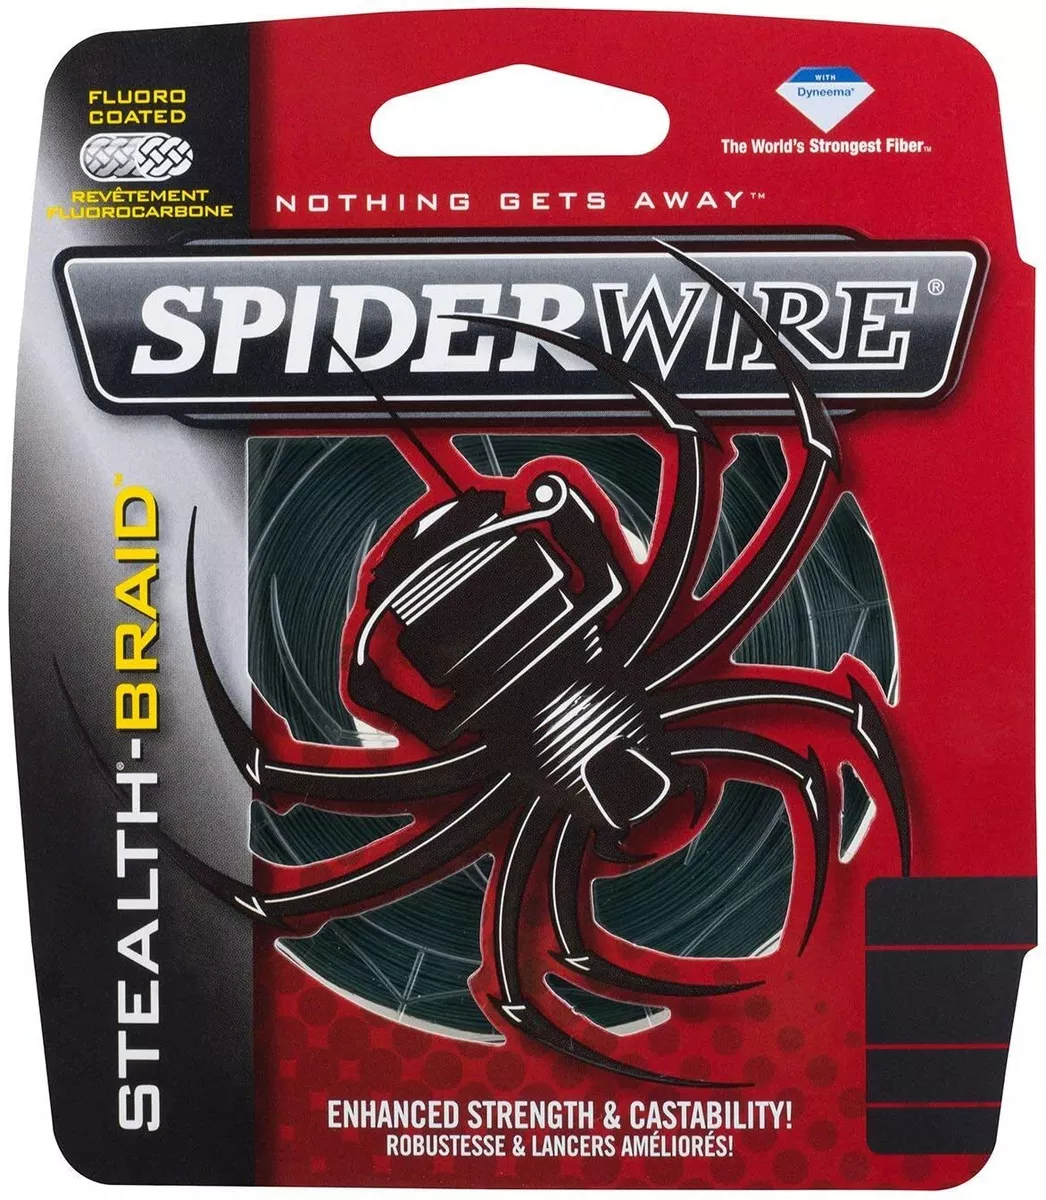 SPIDERWIRE STEALTH Moss Green Braided Fishing Line 40 LB Test and